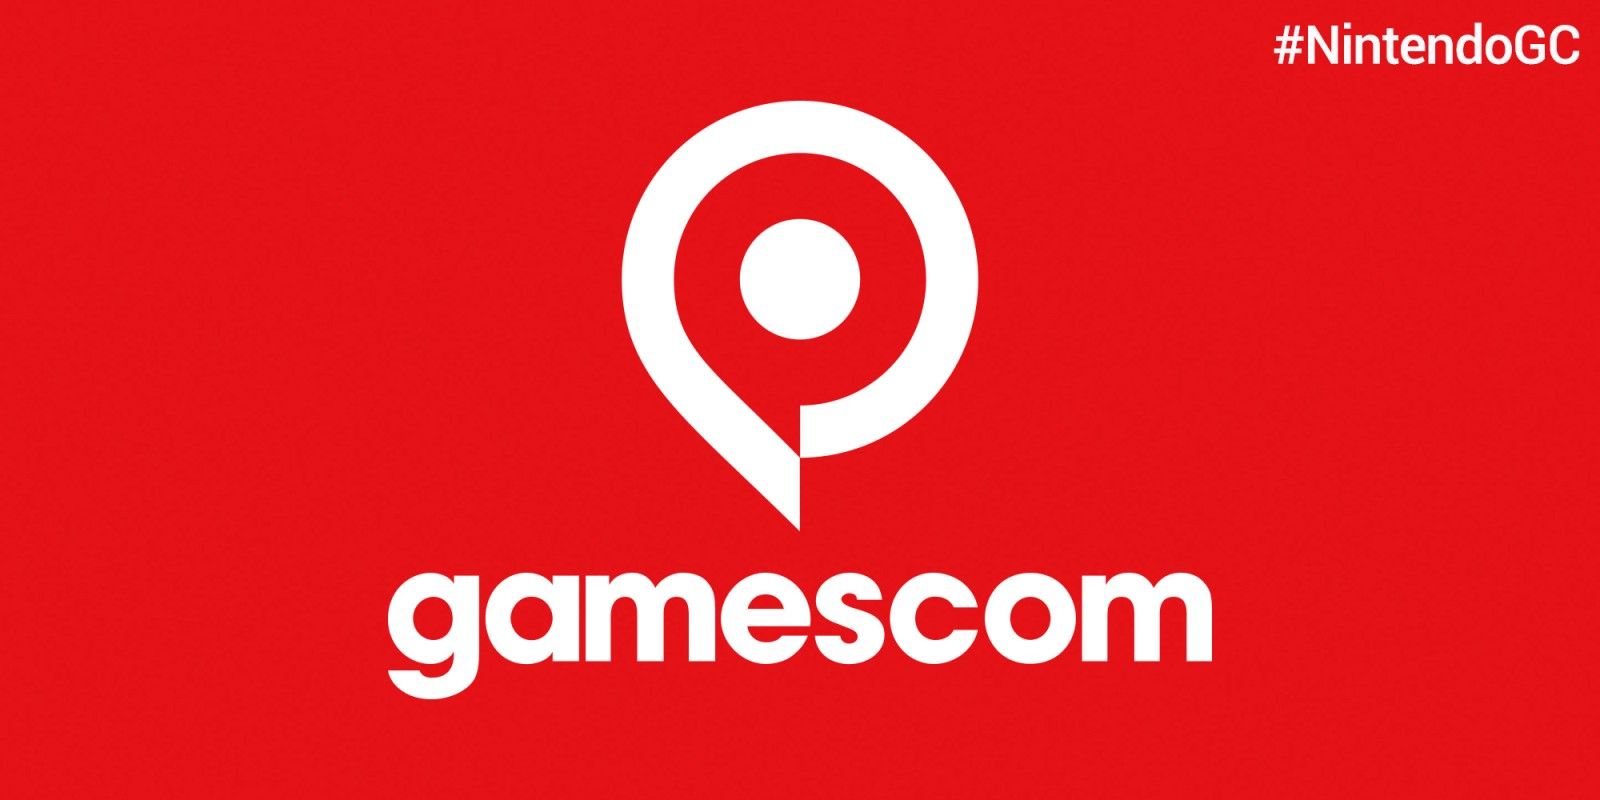 Image for Nintendo's gamescom 2019 Switch line-up includes first hands-on with The Witcher 3